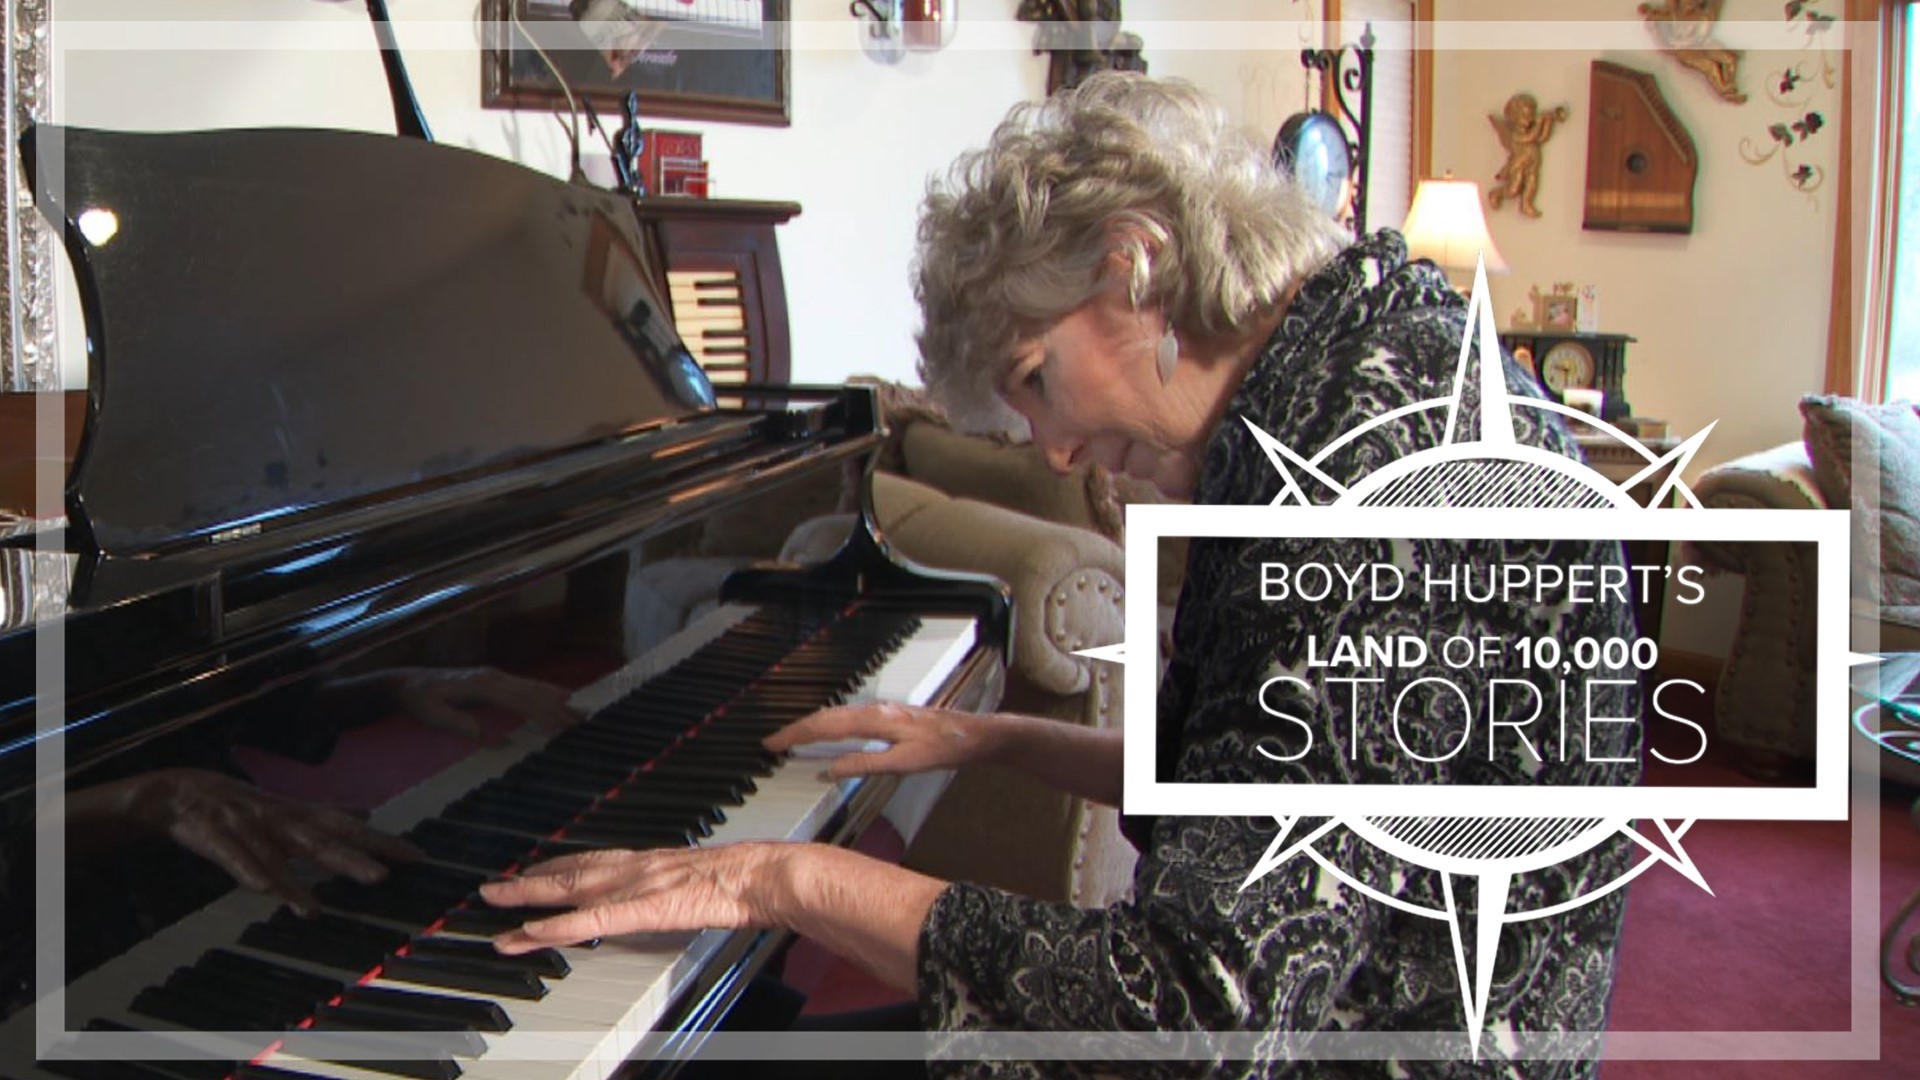 Linda Dieken donated her baby grand piano to replace one destroyed by a fire at the Salvation Army.